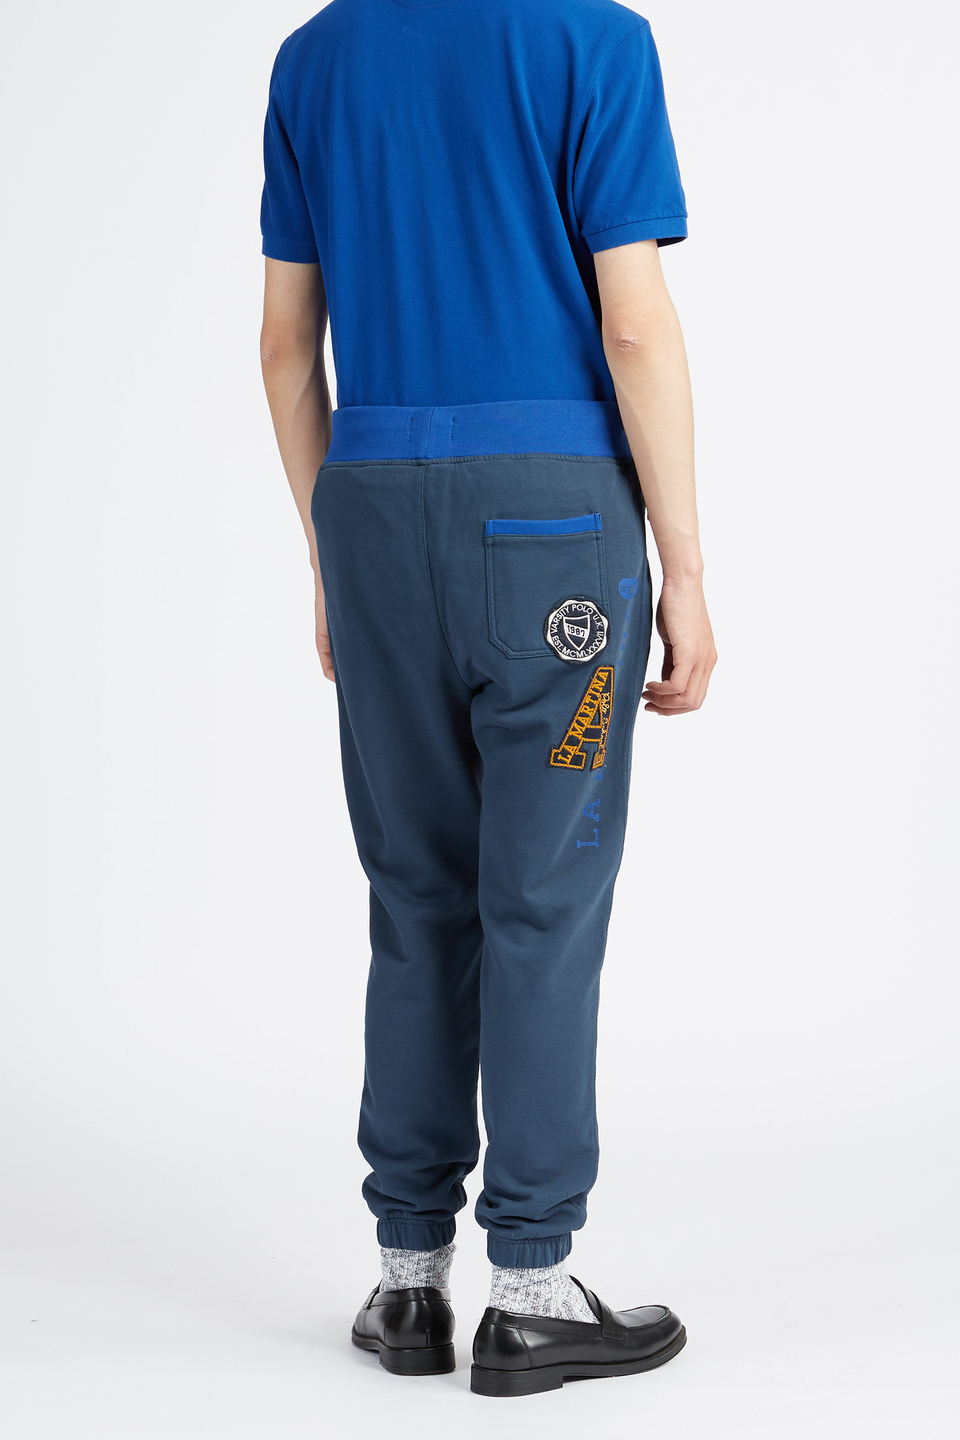 Men's cotton jogger trousers with drawstring and pockets Polo Academy - Vidor | La Martina - Official Online Shop